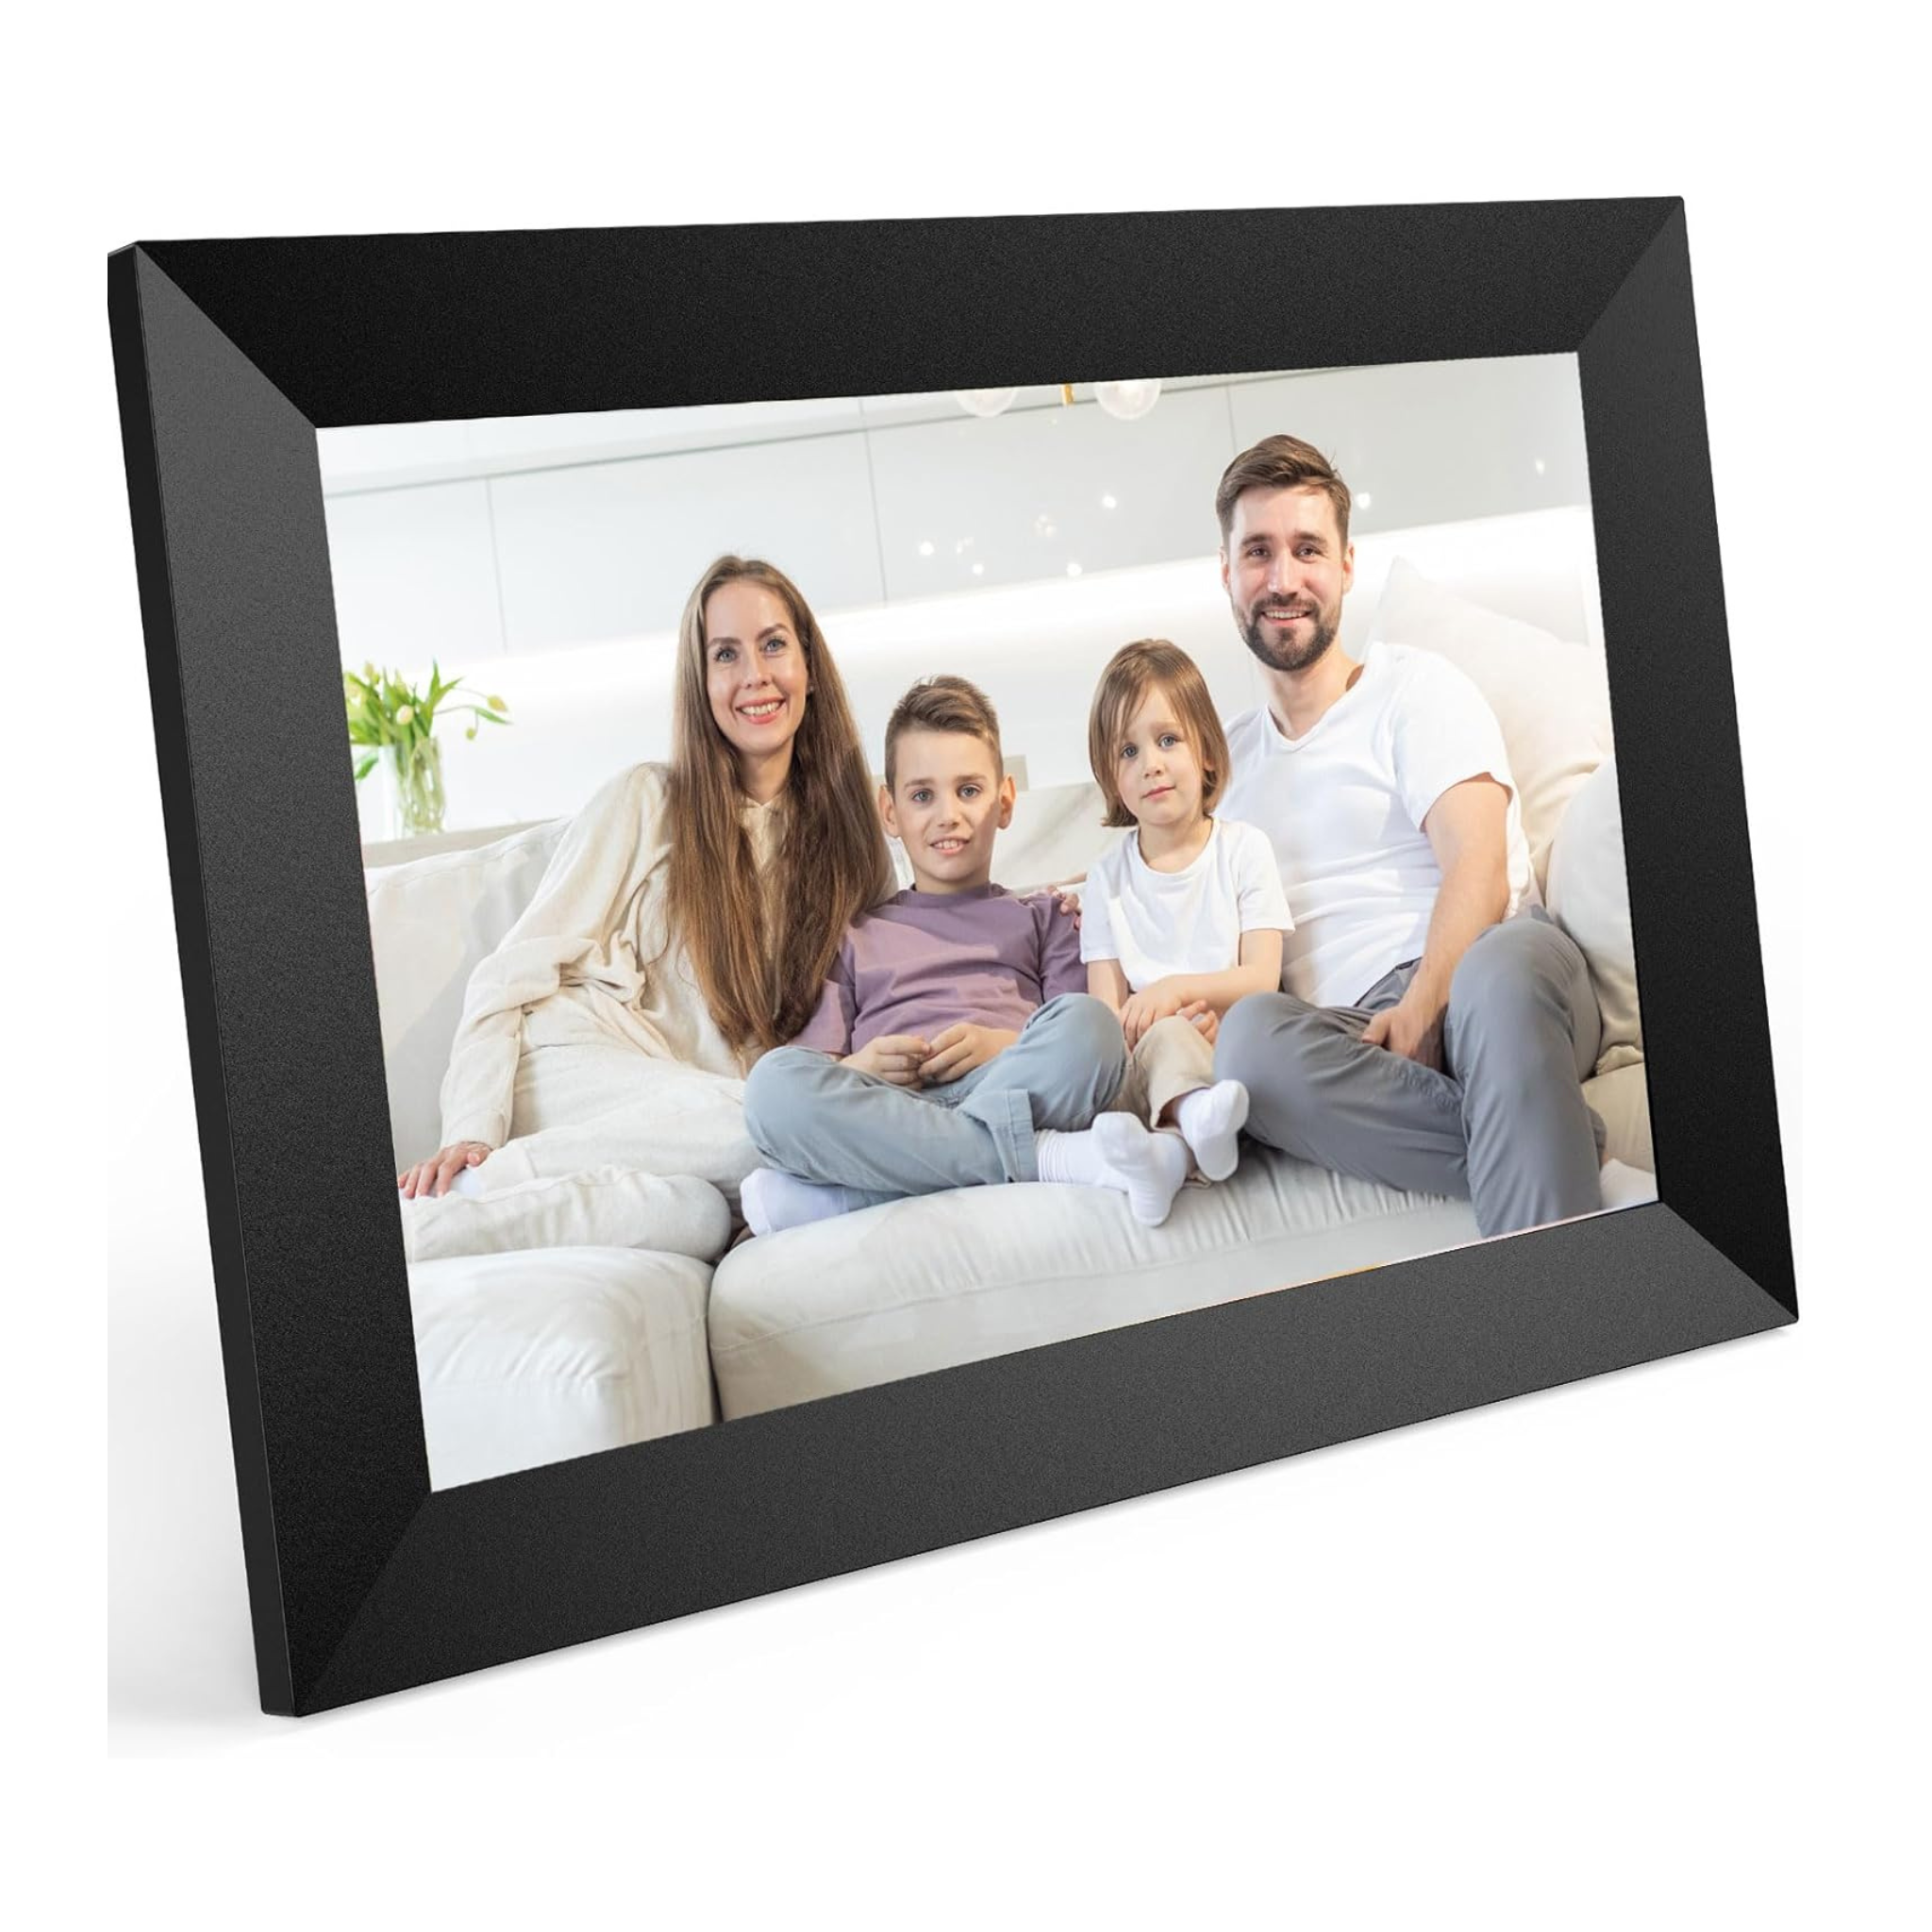 PULLOON 10.1" WiFi Digital Photo Frame with HD Touch Screen